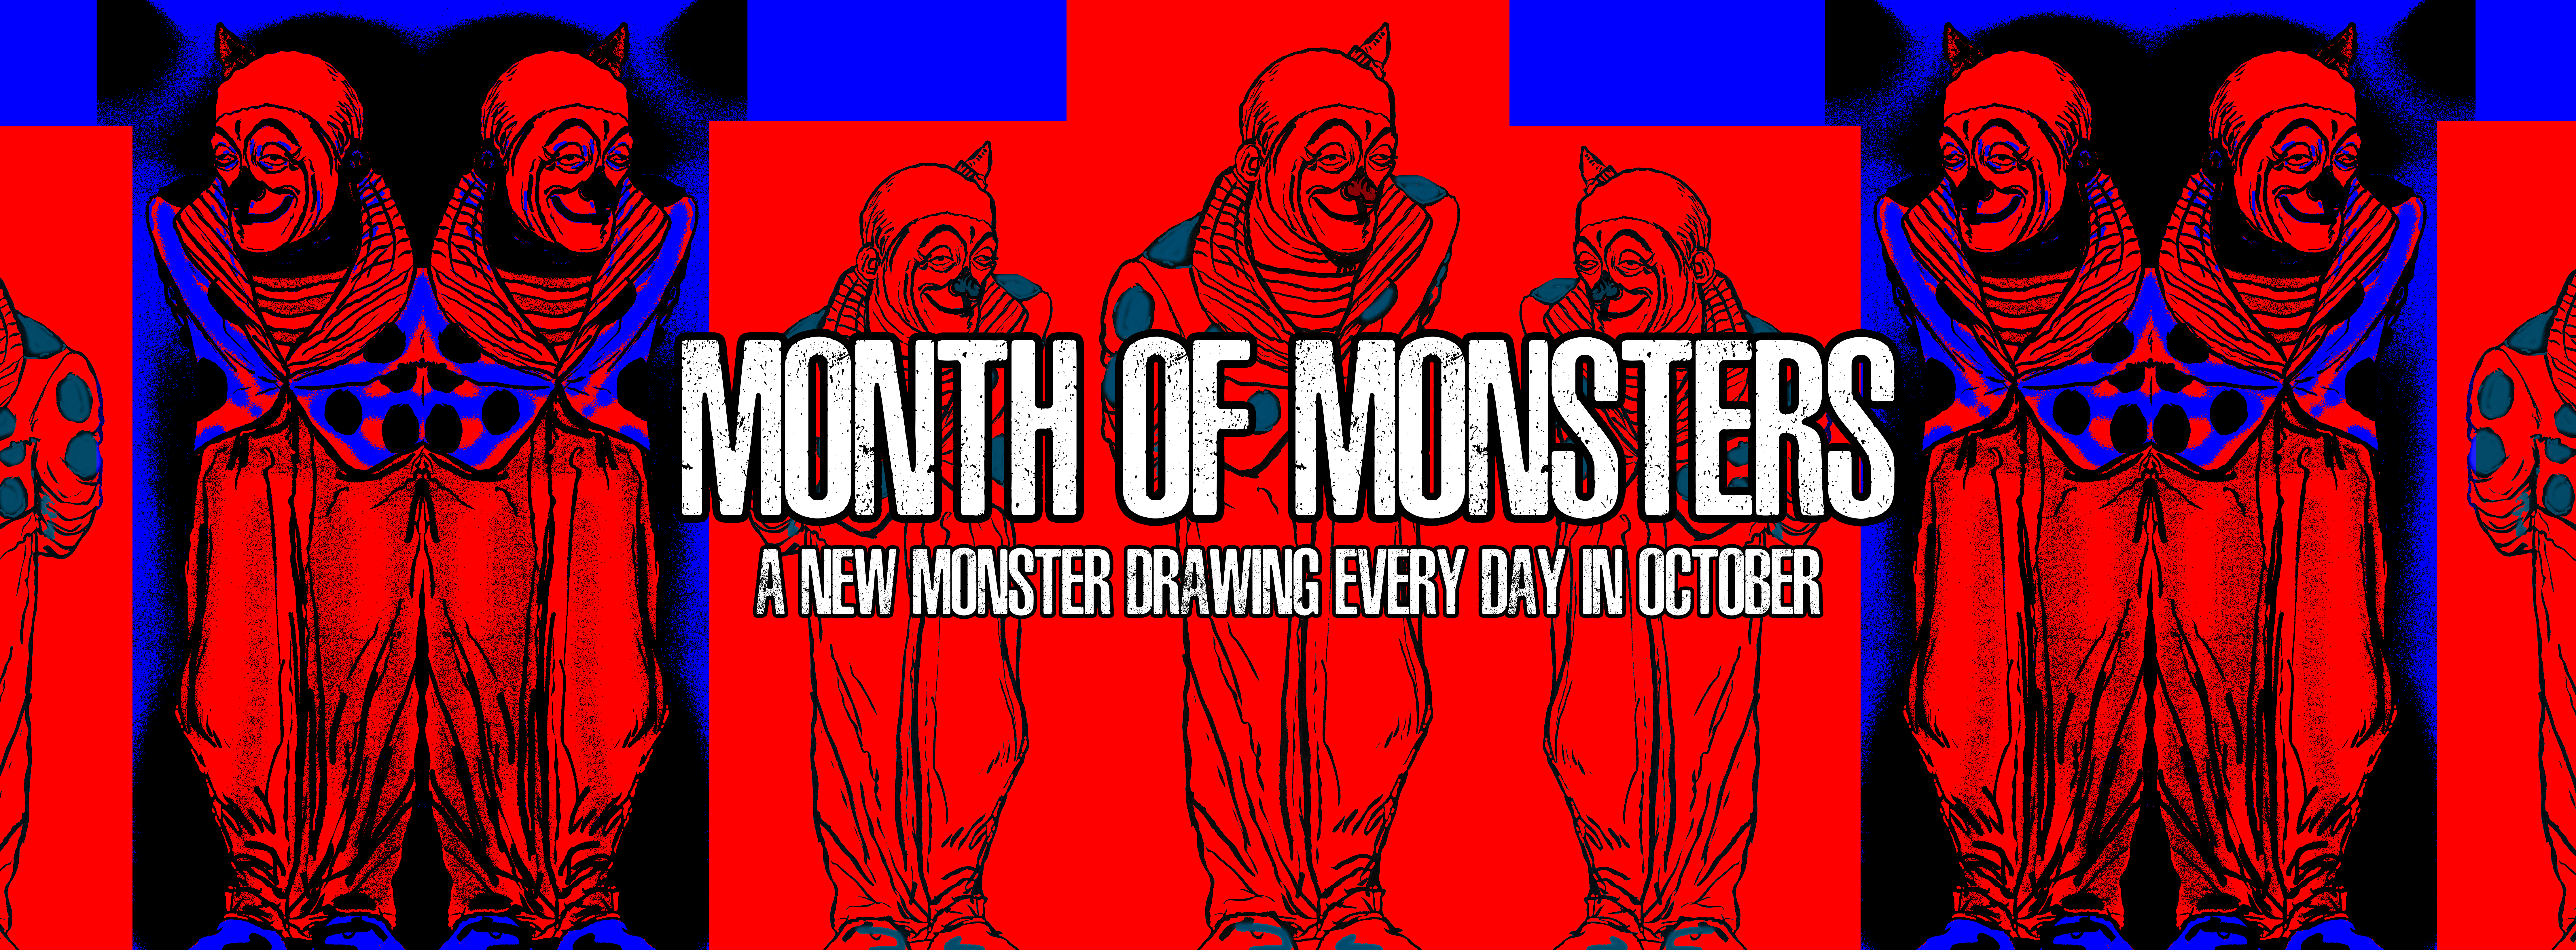 Month of Monsters 2020